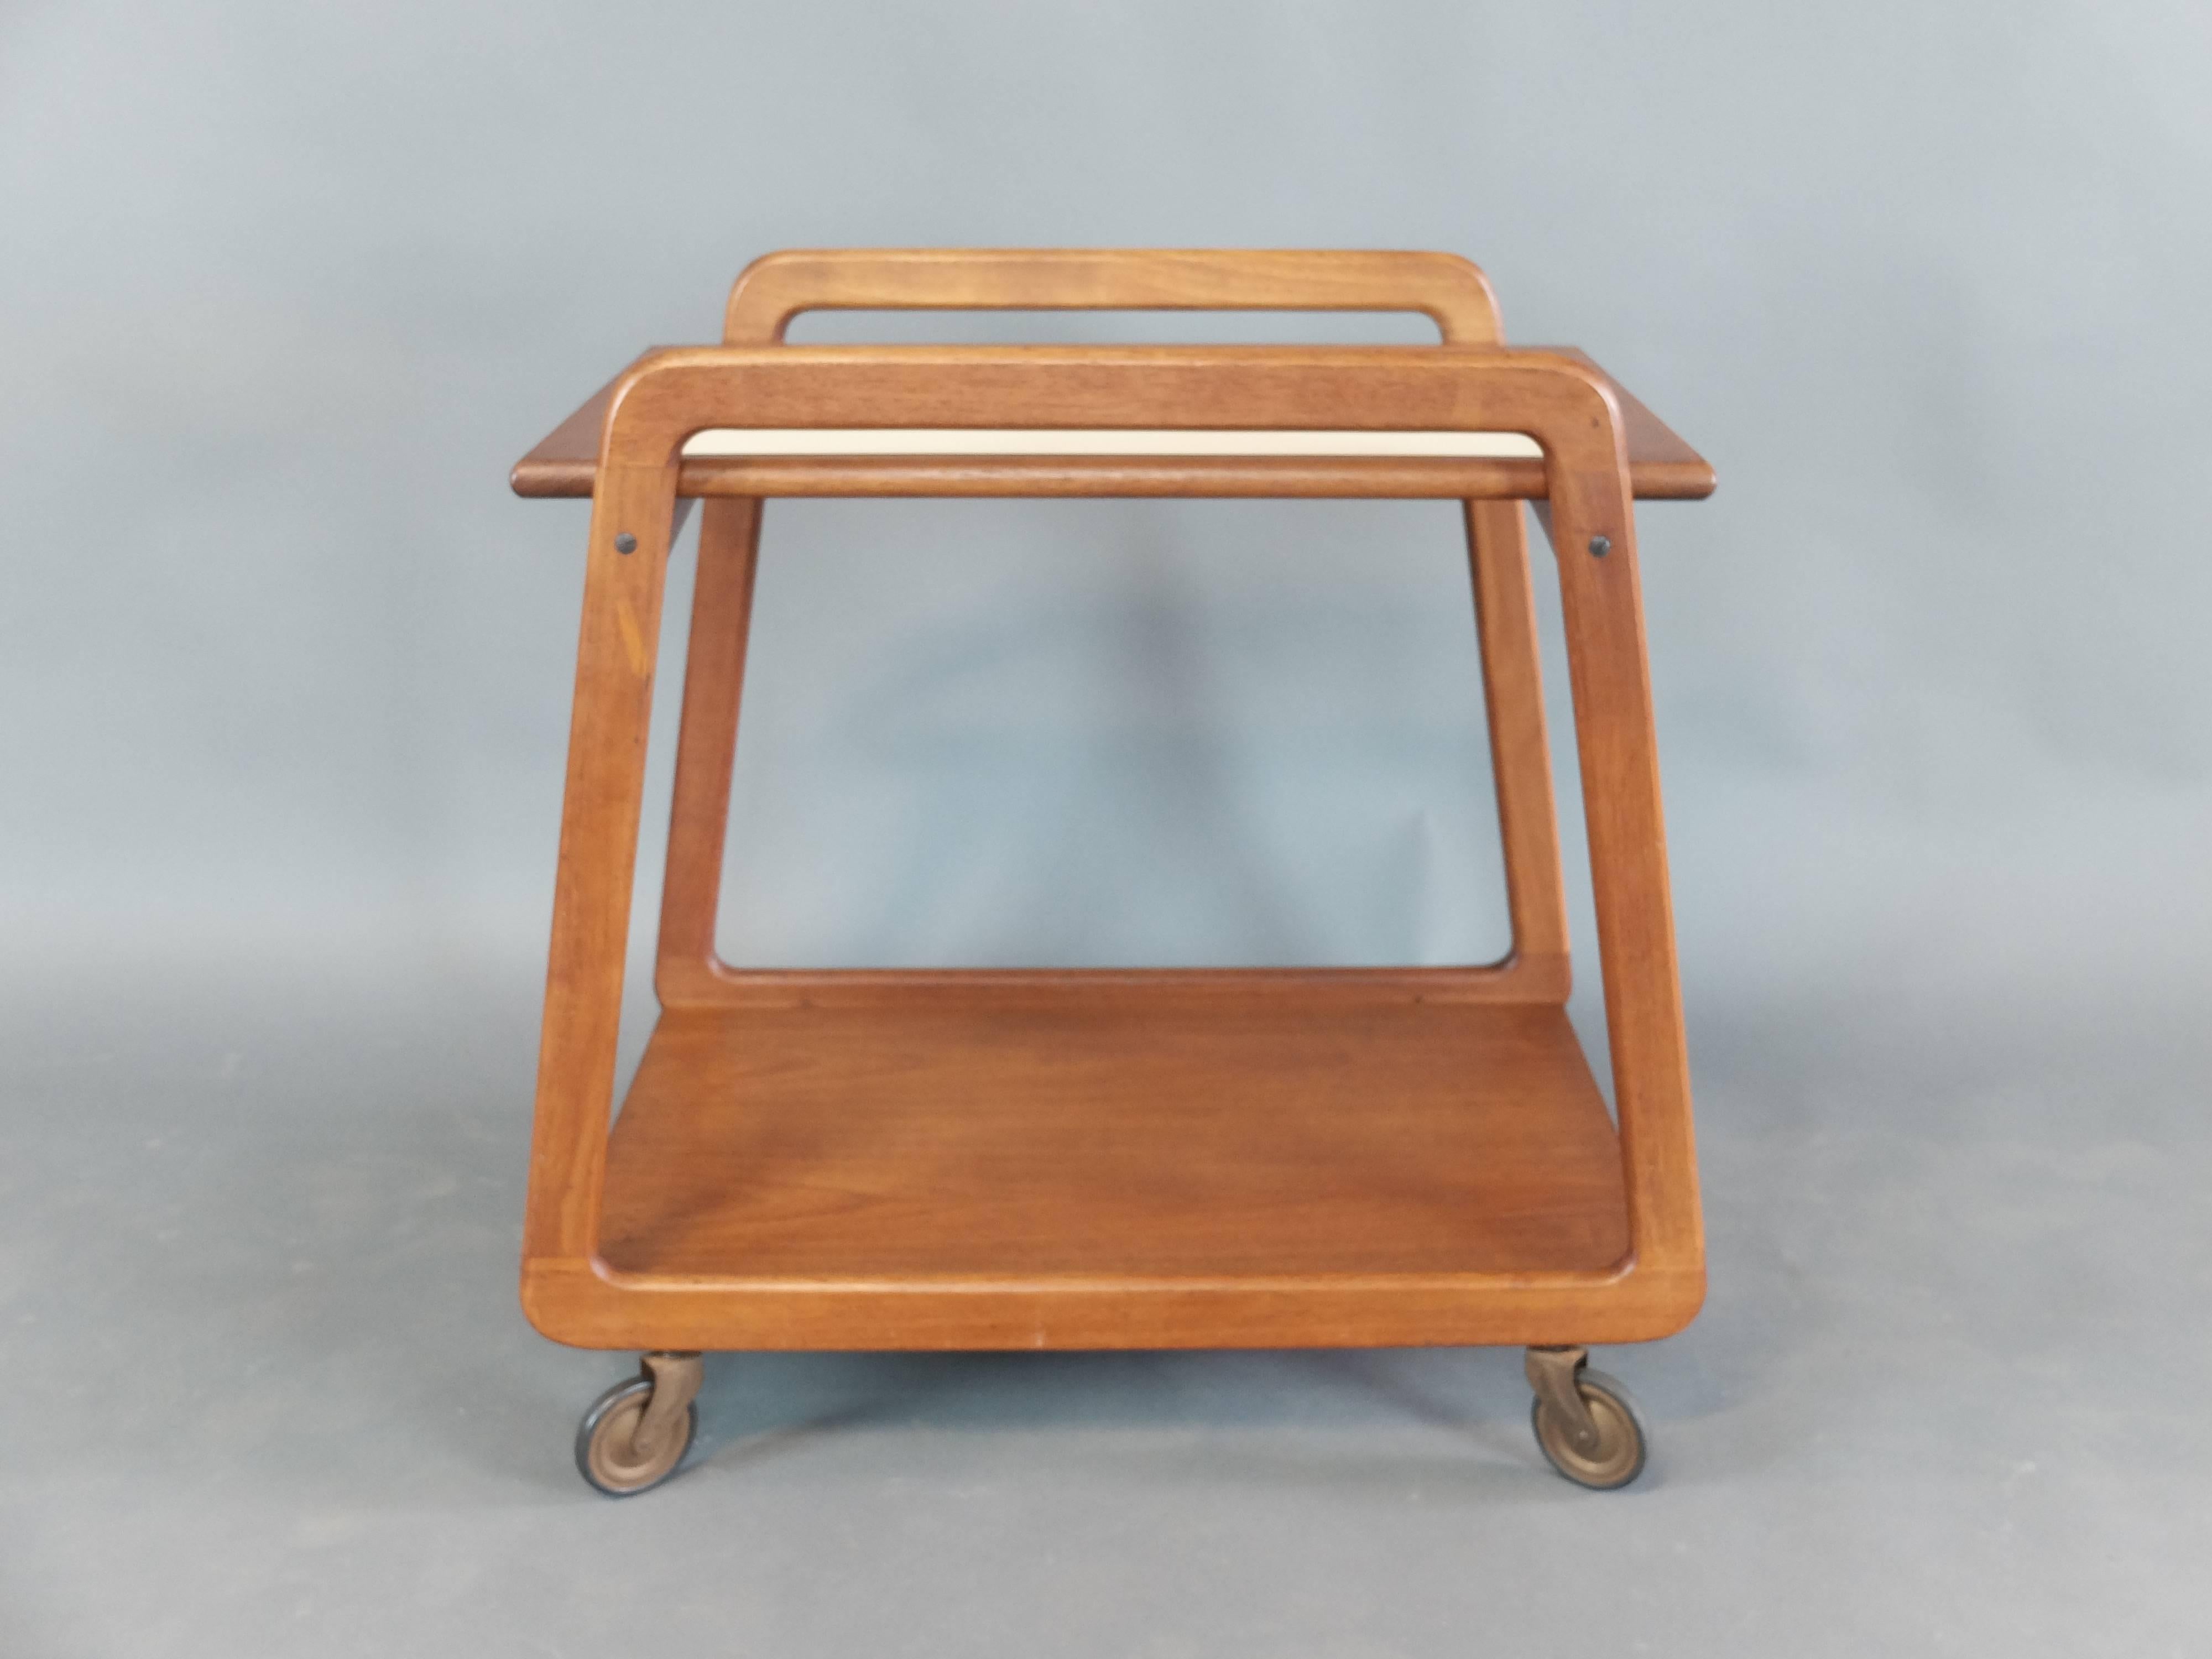 Mid-Century Danish teak drinks trolley by Sika Mobler
Two-tier trolley with reversible lift off top shelf or tray.
Finished in teak and white laminate.
With maker's stamp.